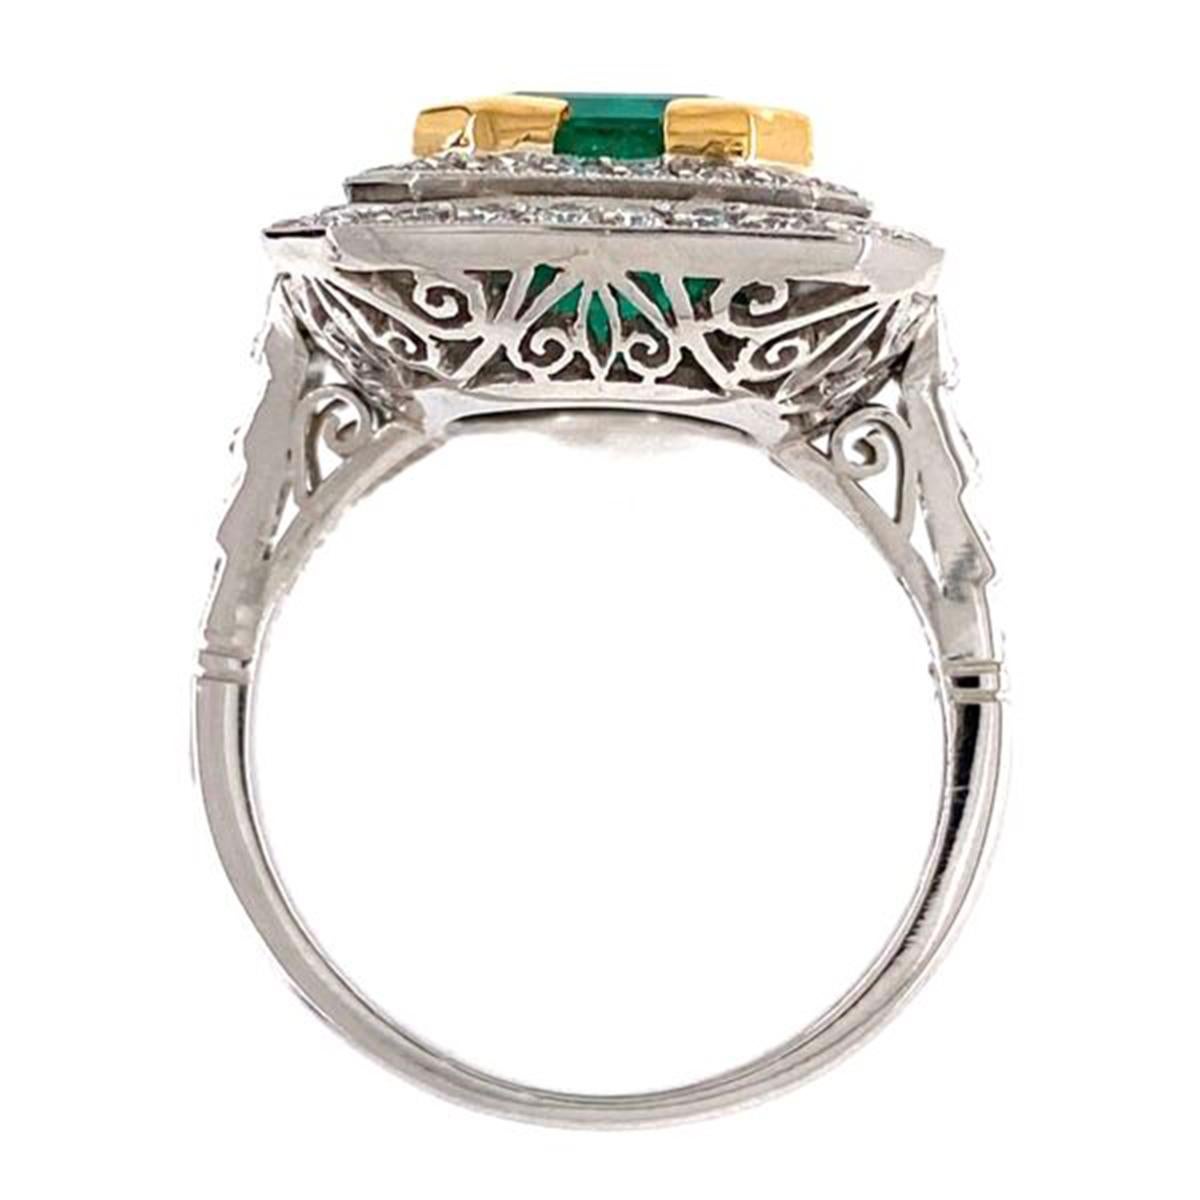 Elegant & finely detailed Solitaire Cocktail Engagement Ring, set with a securely nestled 4.52 Carat Emerald Cut Emerald, weighing approx. 4.52 Carats, surrounded by and extending to the shoulders, Brilliant-cut Diamonds, weighing approx. 1.05 total